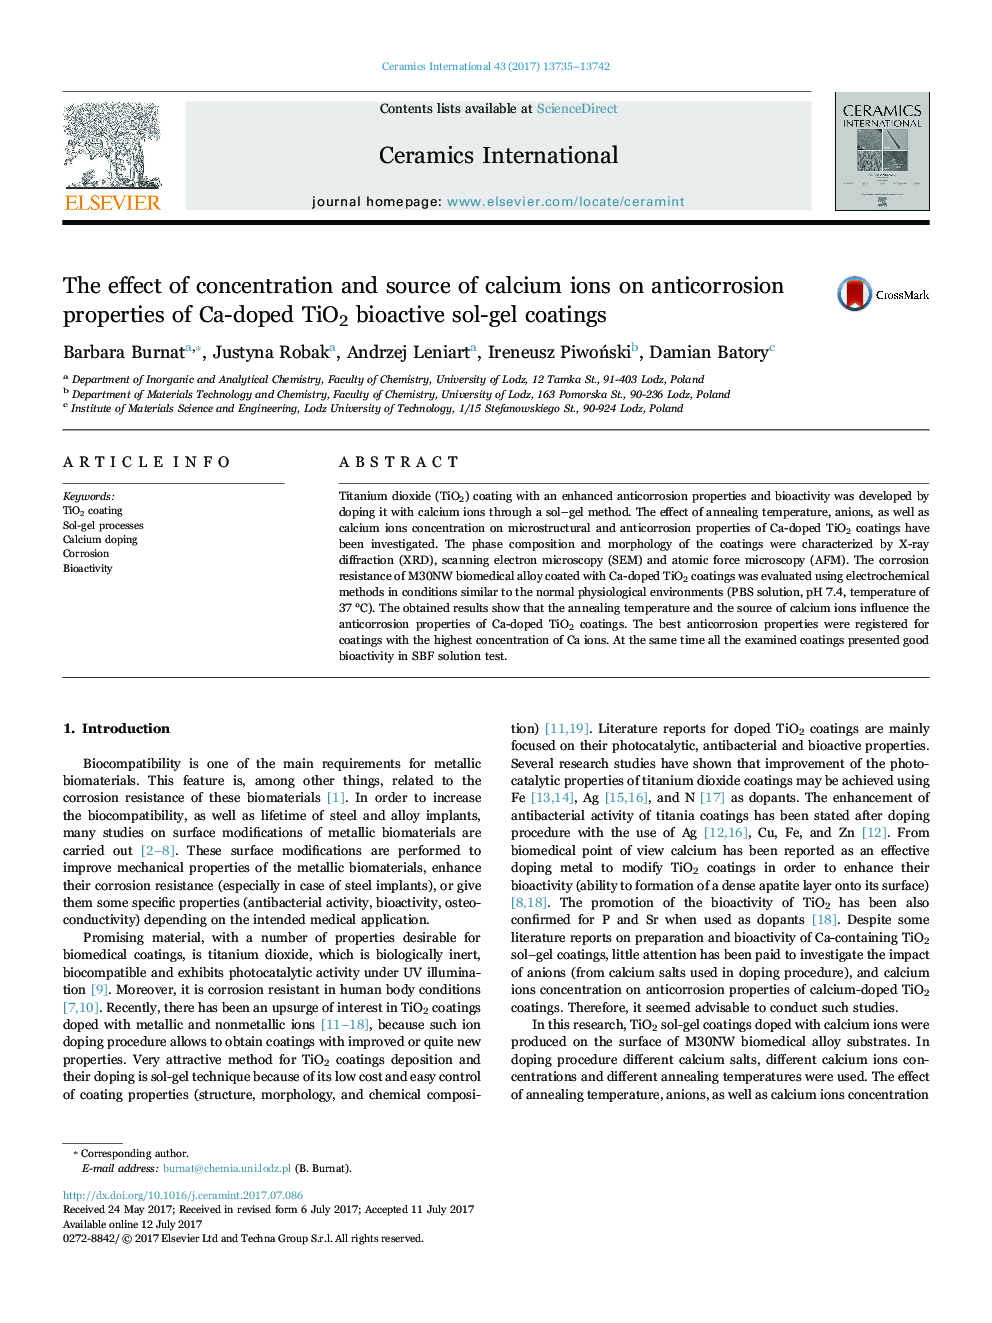 The effect of concentration and source of calcium ions on anticorrosion properties of Ca-doped TiO2 bioactive sol-gel coatings